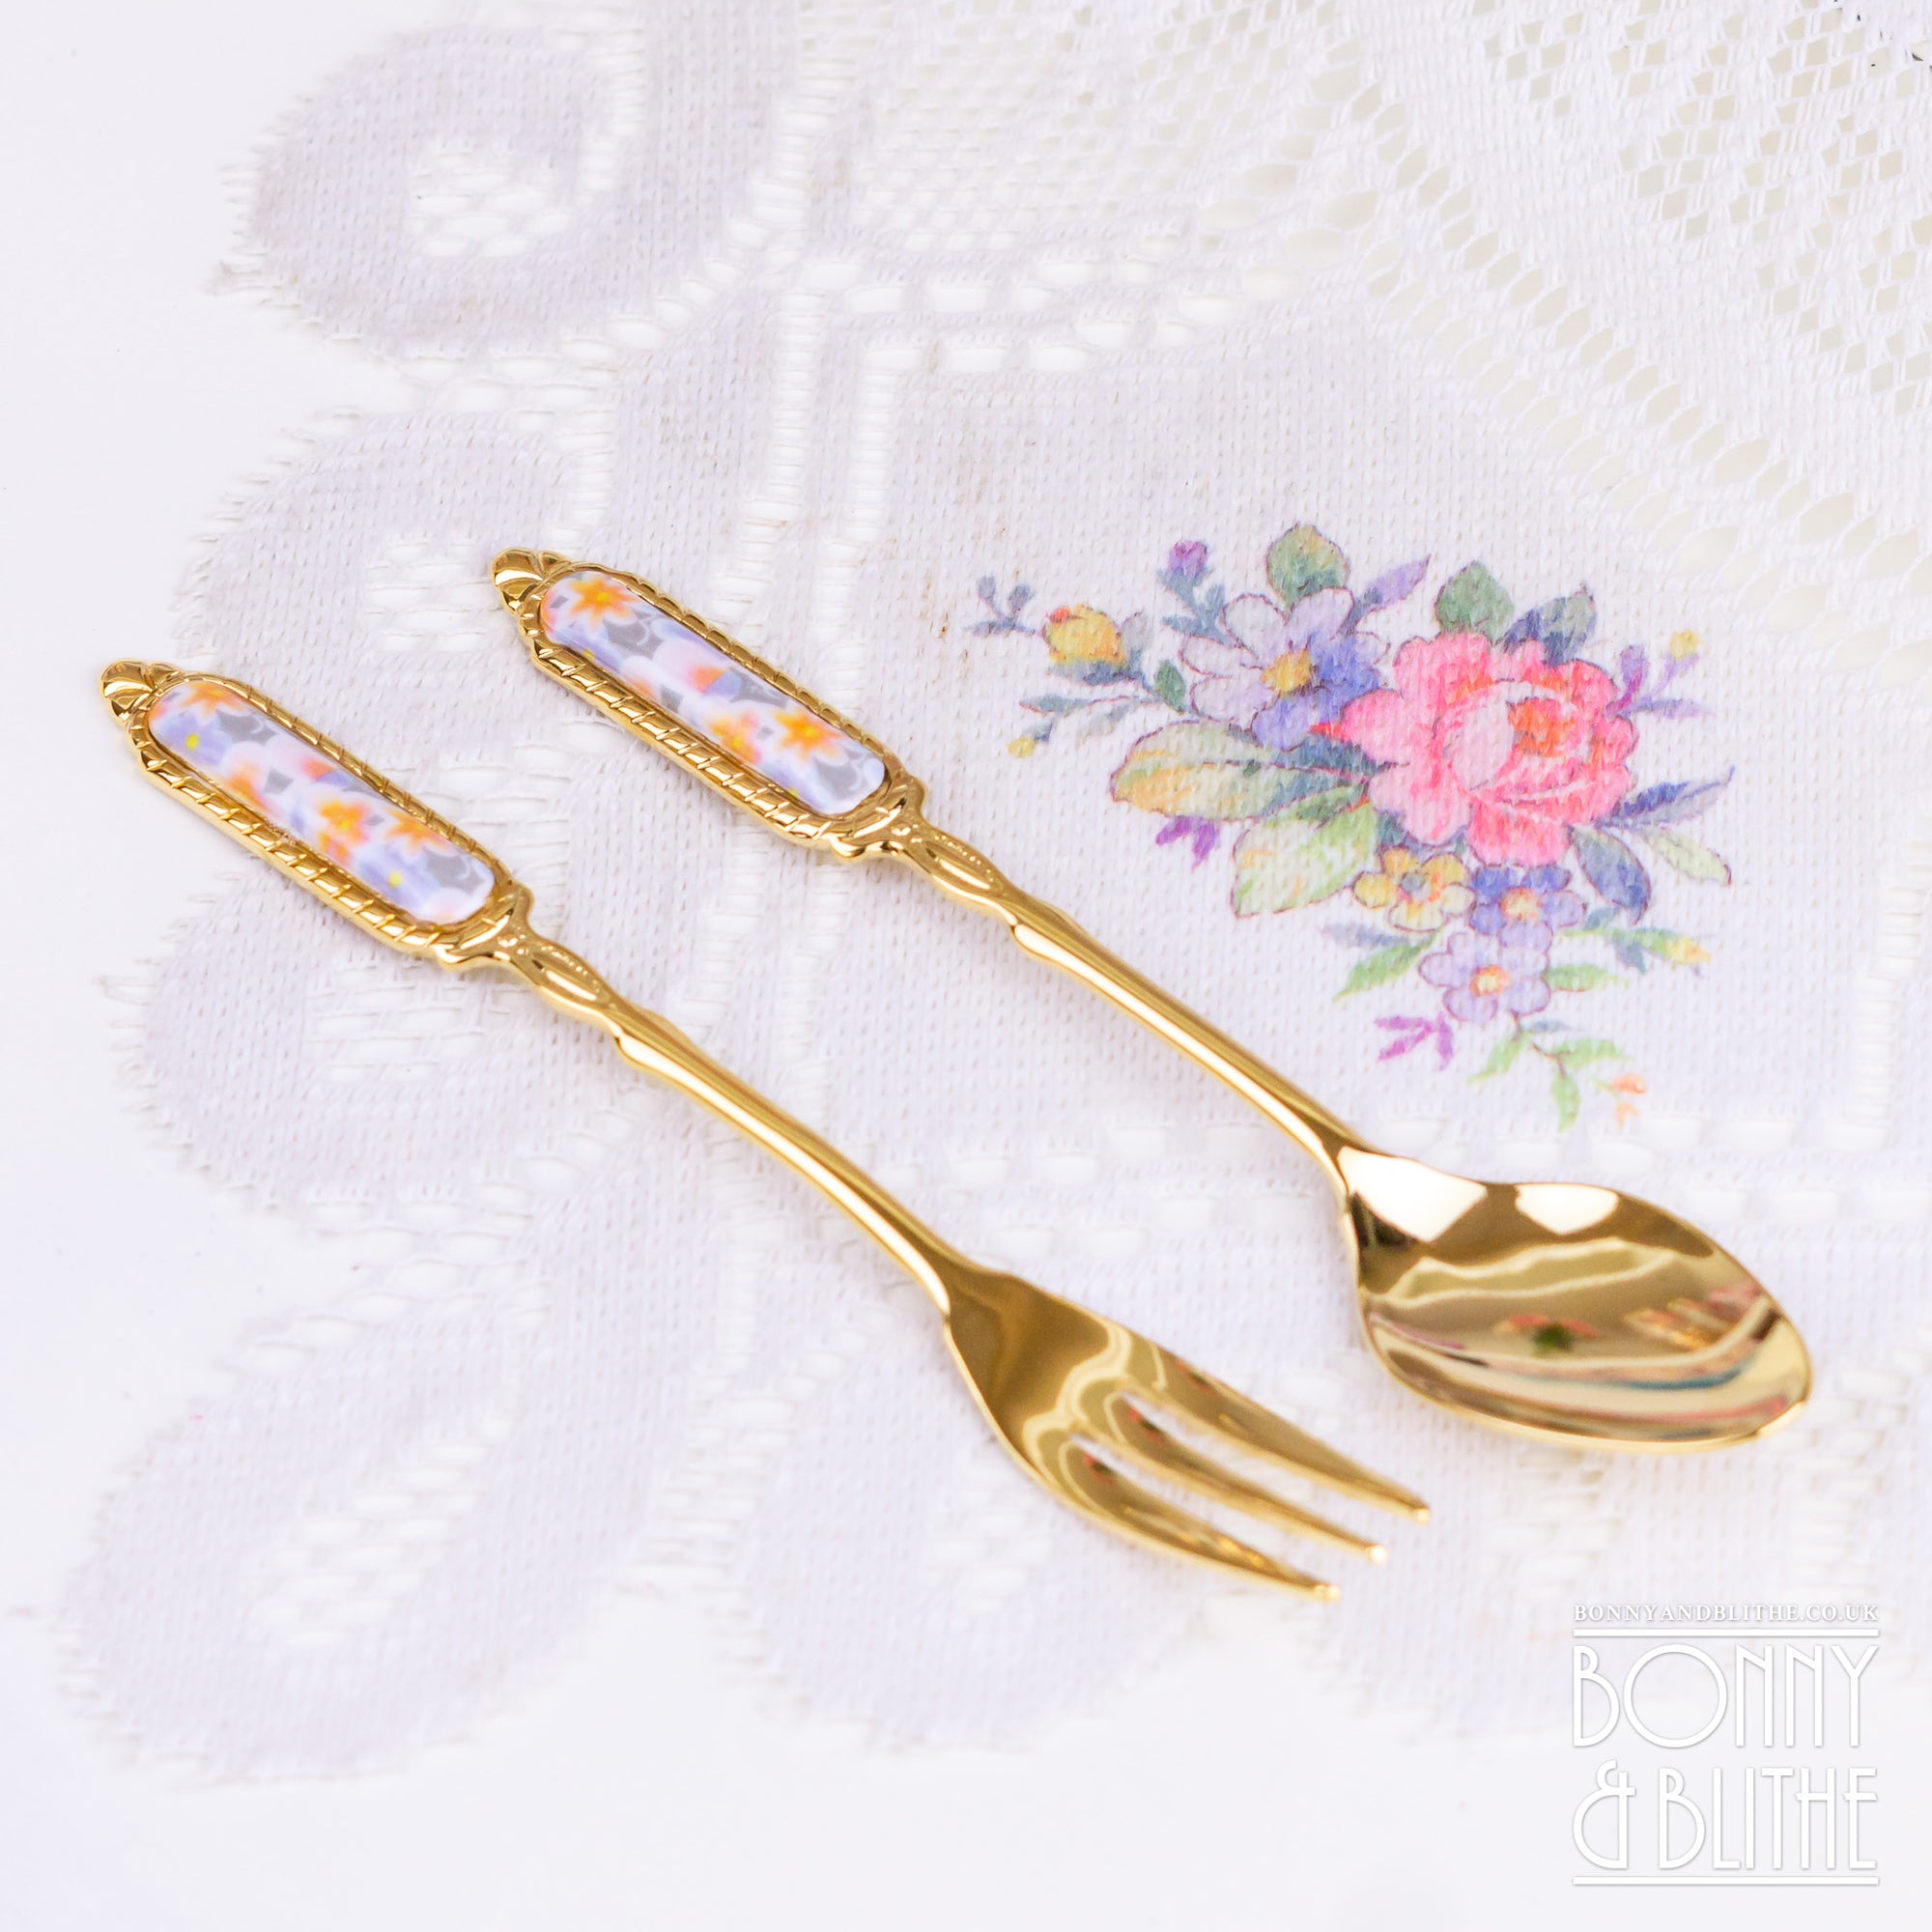 Gold Plated Autumn Leaves Teaspoon and Cake Fork